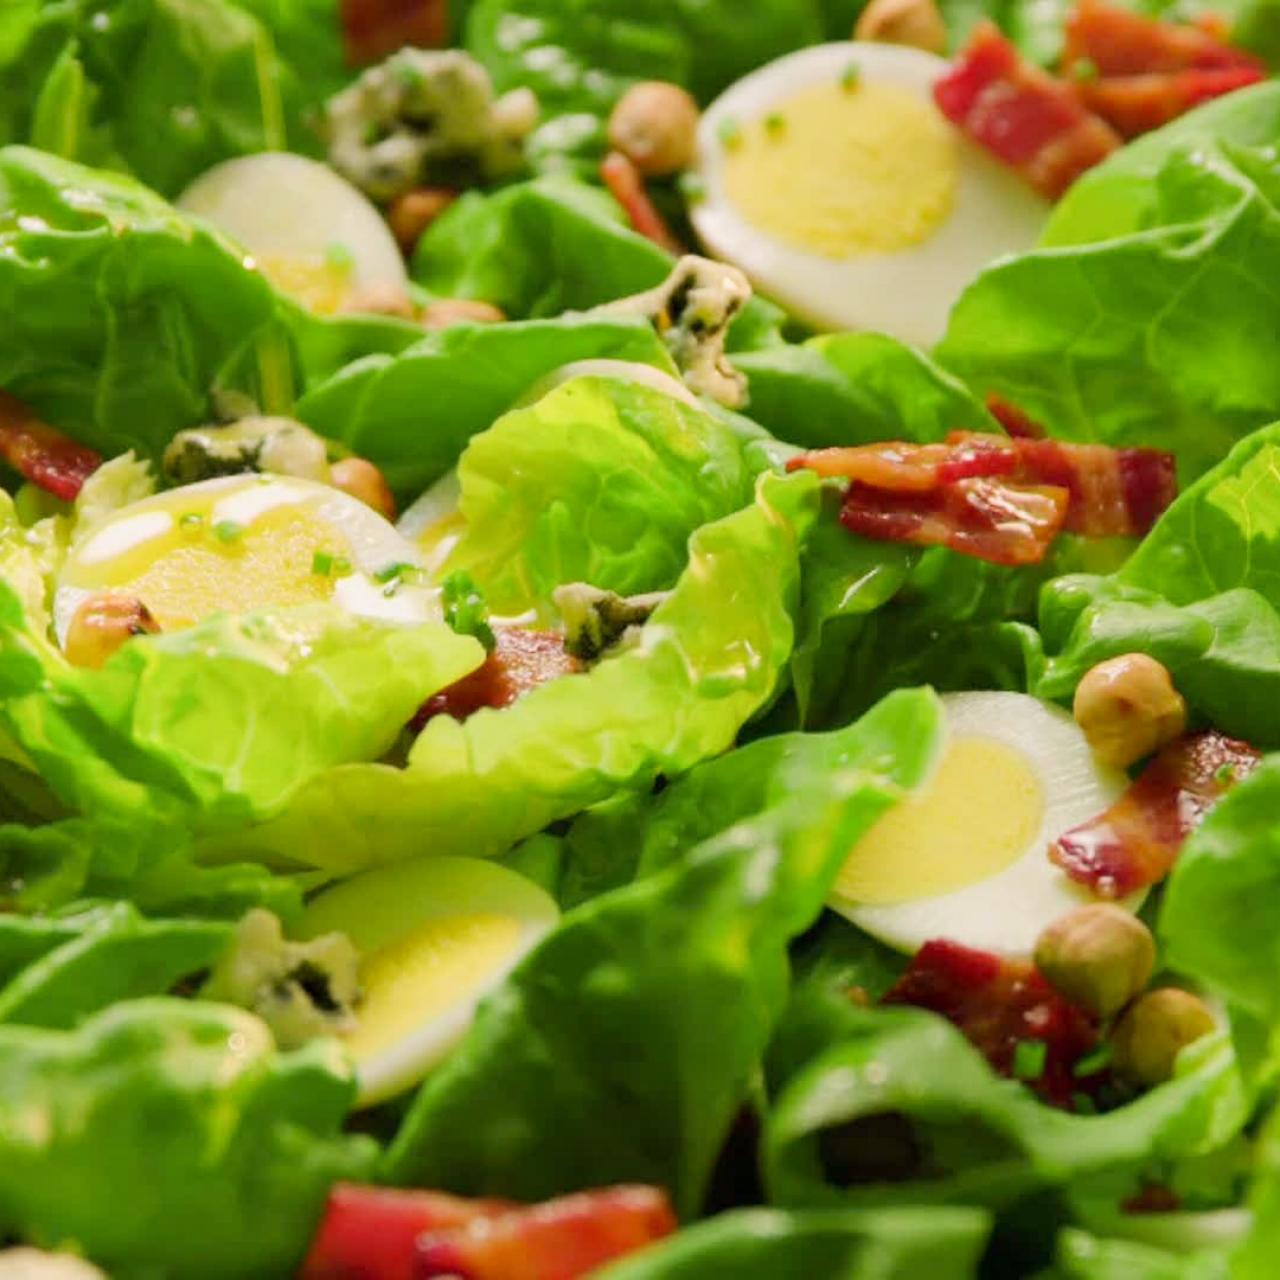 https://food.fnr.sndimg.com/content/dam/images/food/fullset/2016/5/4/0/VB0106H_Butter-Lettuce-Salad-with-Hazelnuts-and-Bacon-Bits_s4x3.jpg.rend.hgtvcom.1280.1280.suffix/1462368090355.jpeg